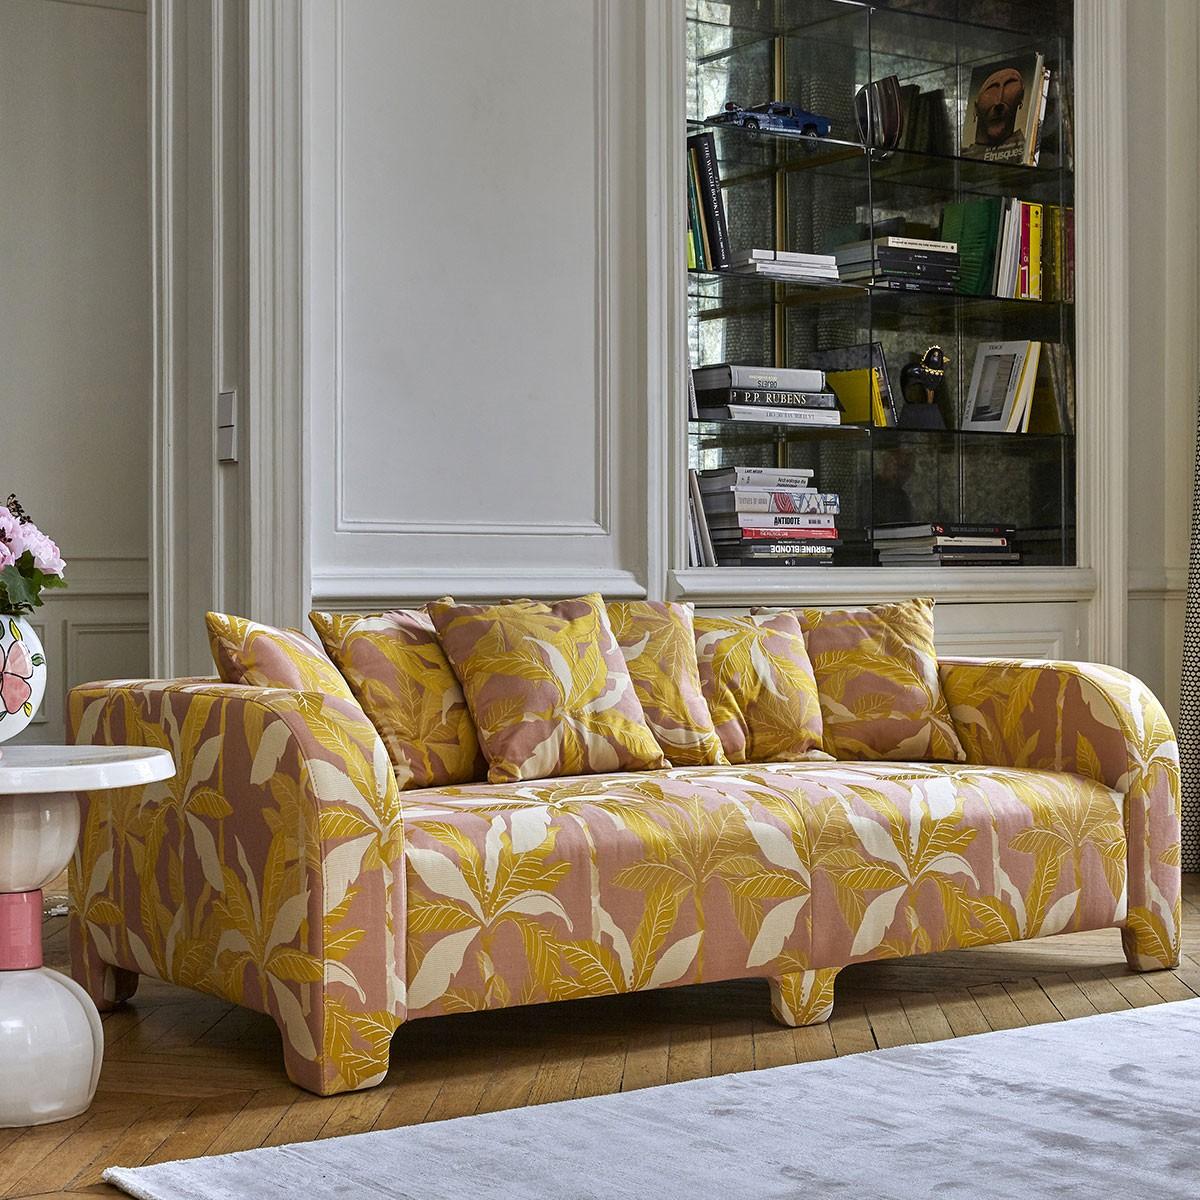 Popus Editions Graziella 3 Seater Sofa in Amber Como Velvet Upholstery

A foot that hides another. A cushion that hides another. A curve that hides another with contemporary lines and a base like a punctuation mark, this sofa gives pride of place